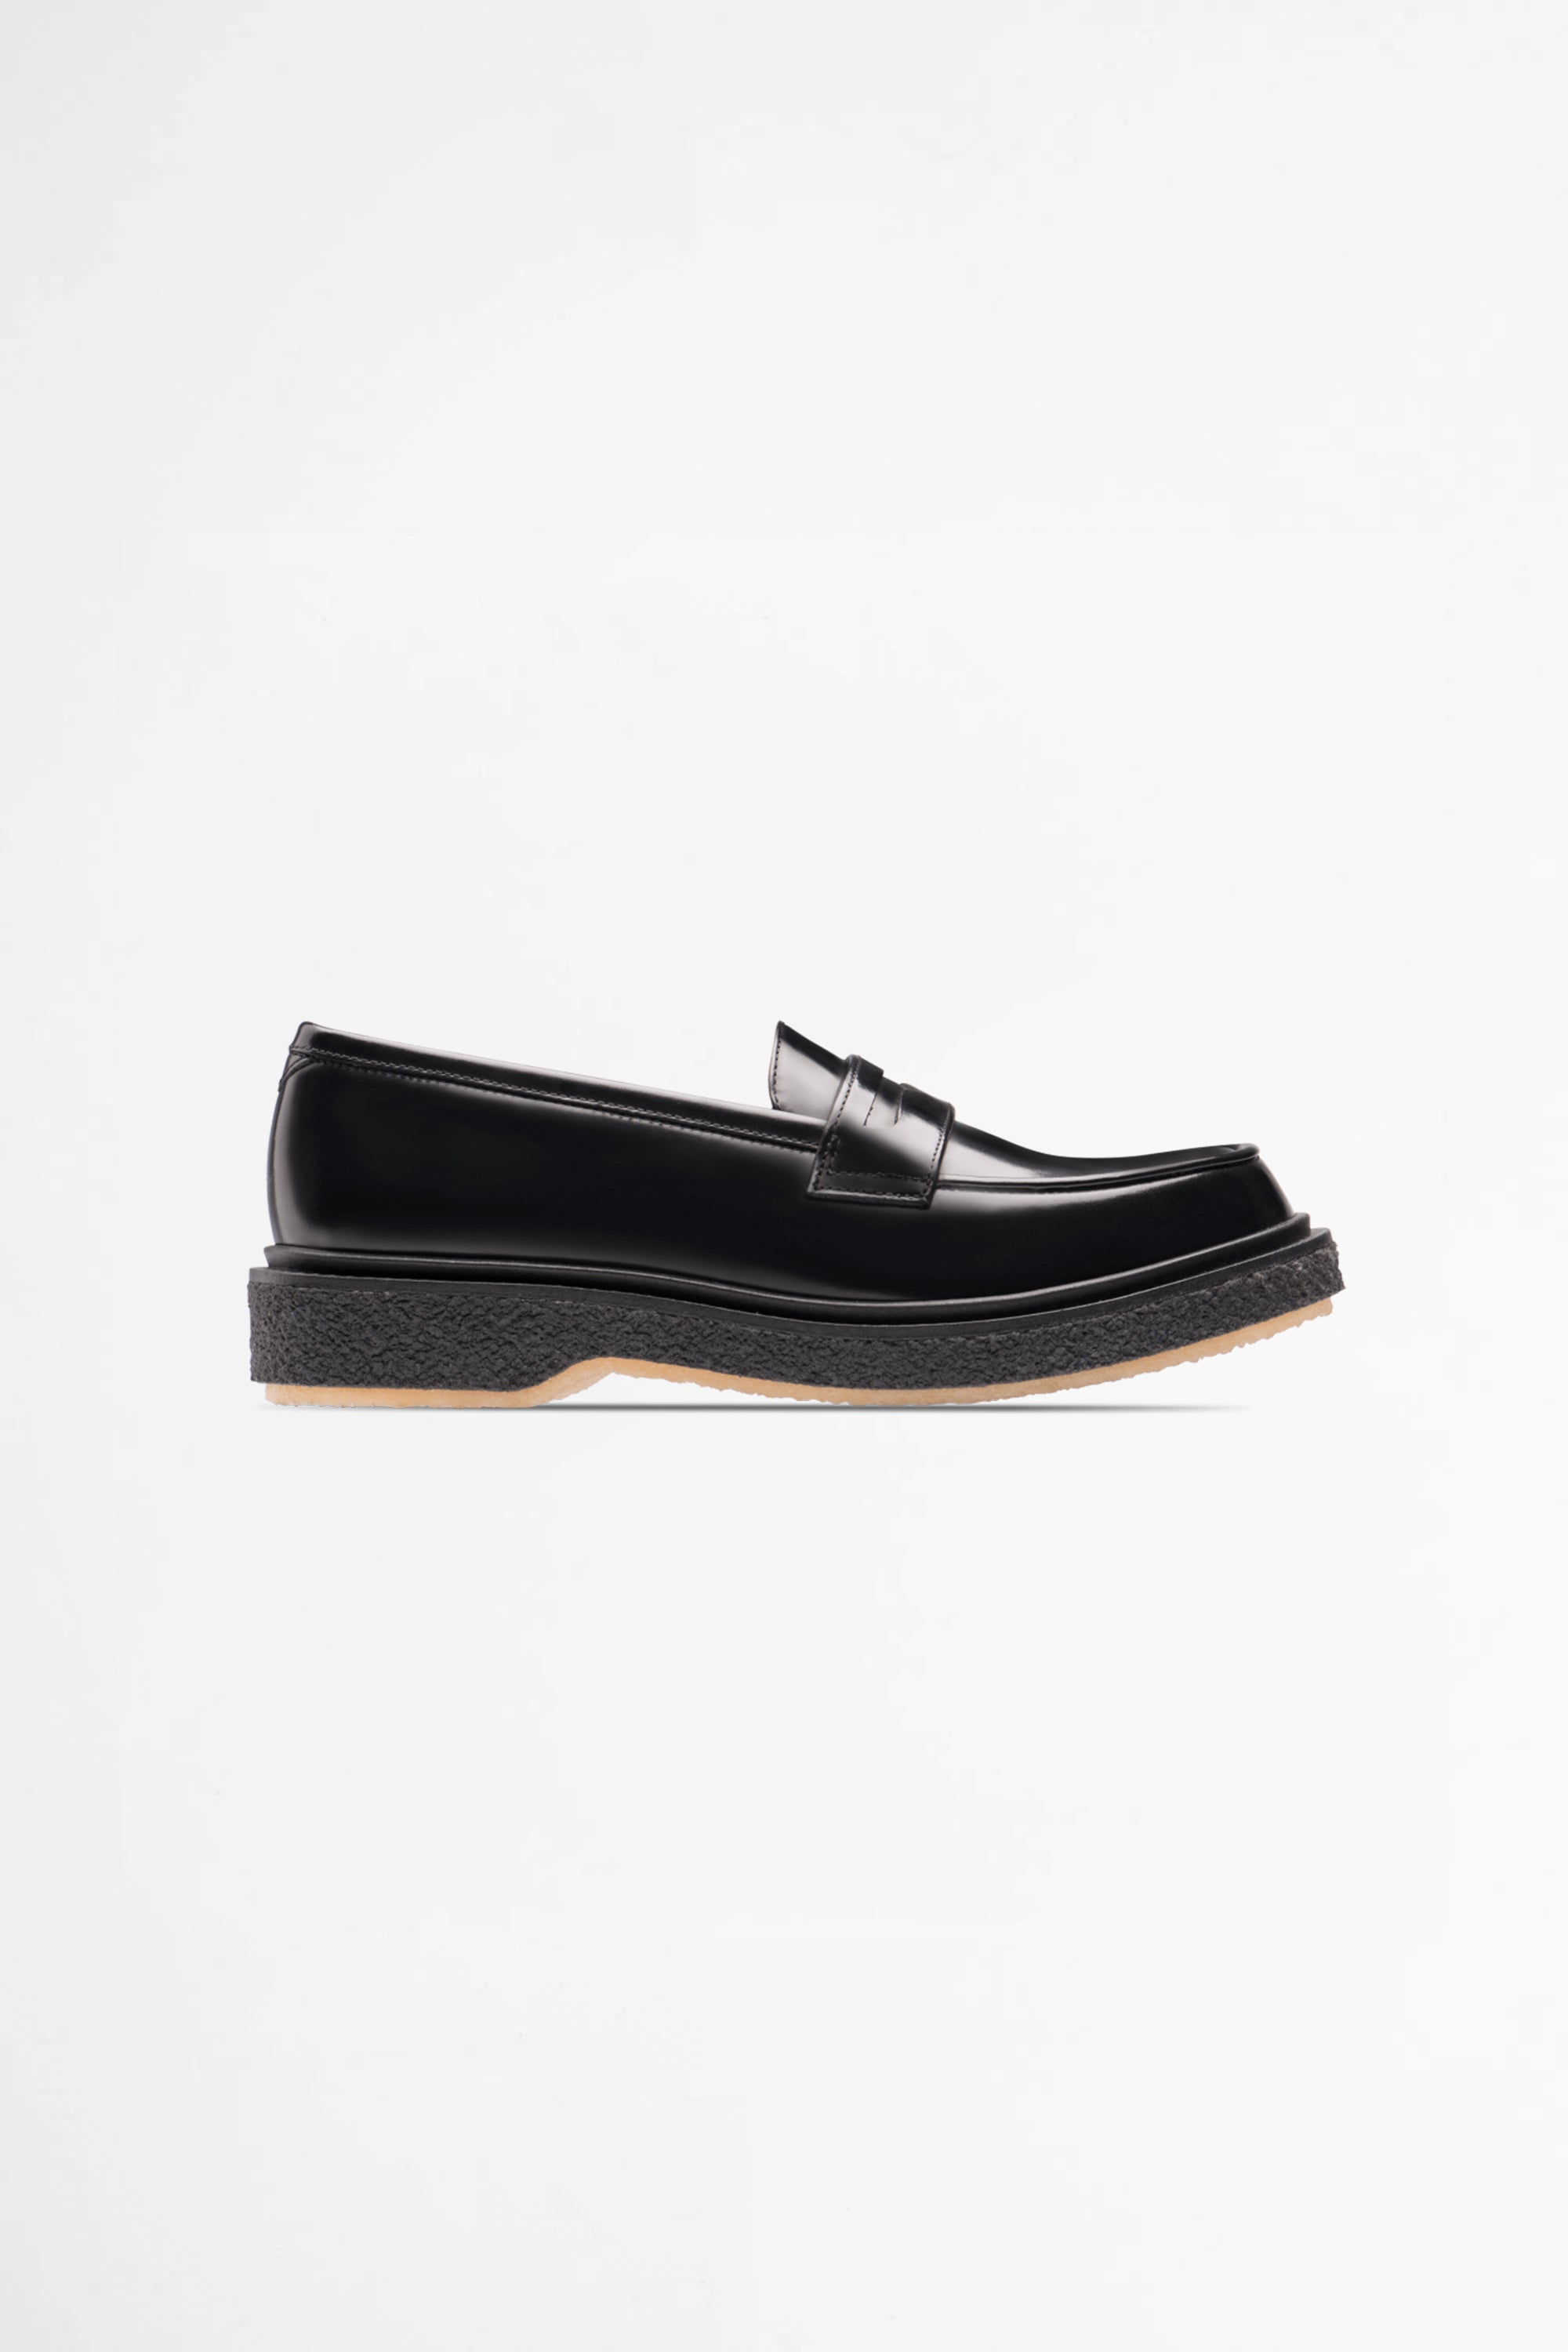 SPORTIVO [Type 5 classic loafer black]